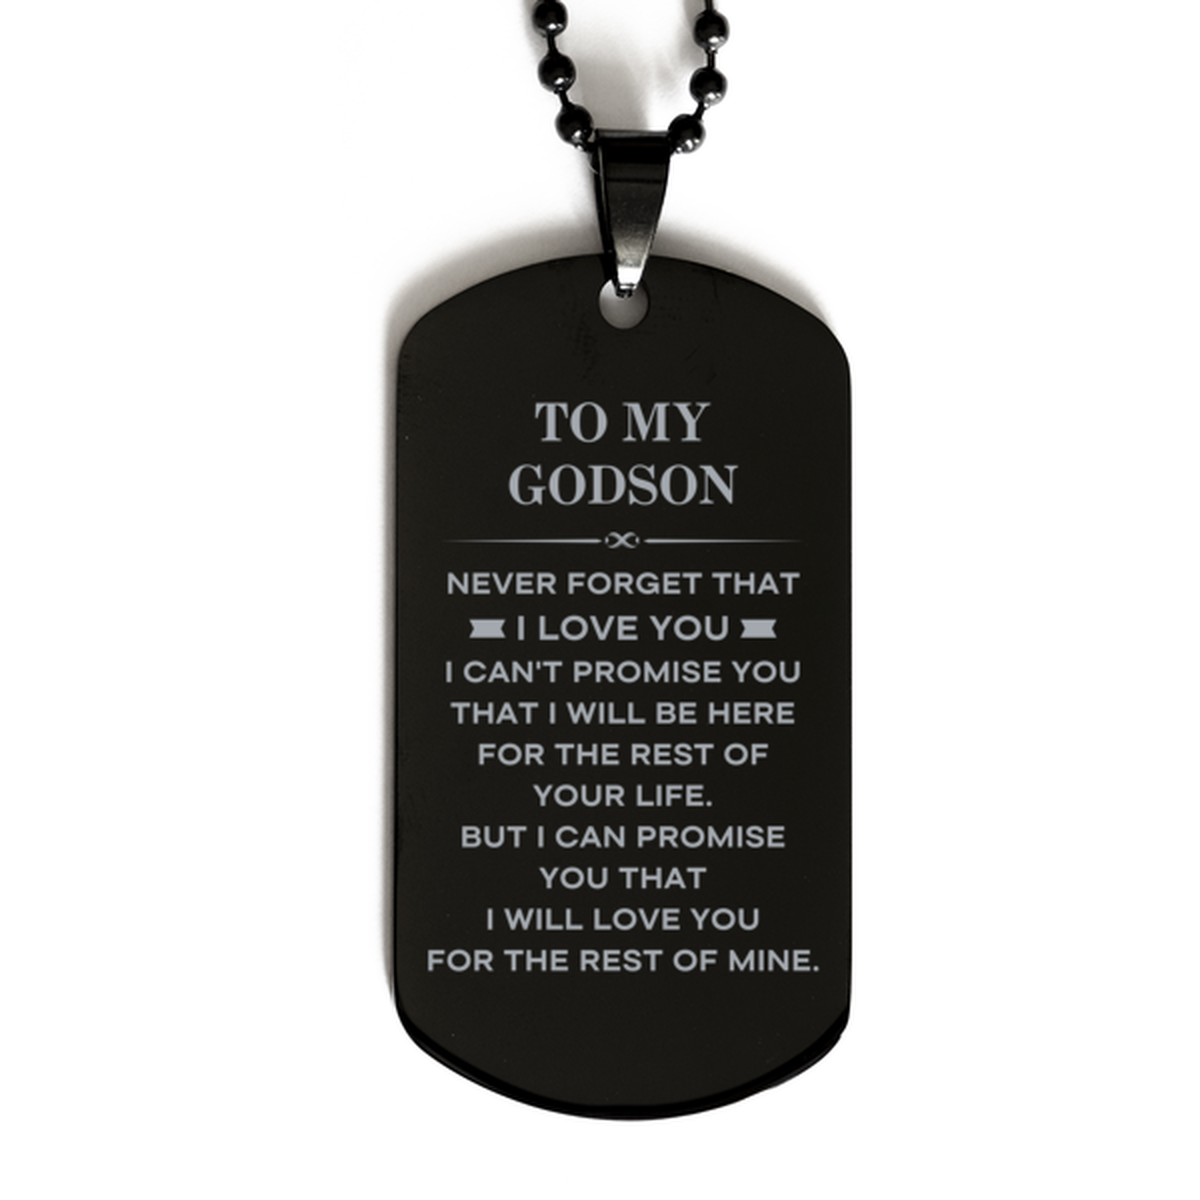 To My Godson Gifts, I will love you for the rest of mine, Love Godson Dog Tag Necklace, Birthday Christmas Unique Black Dog Tag For Godson